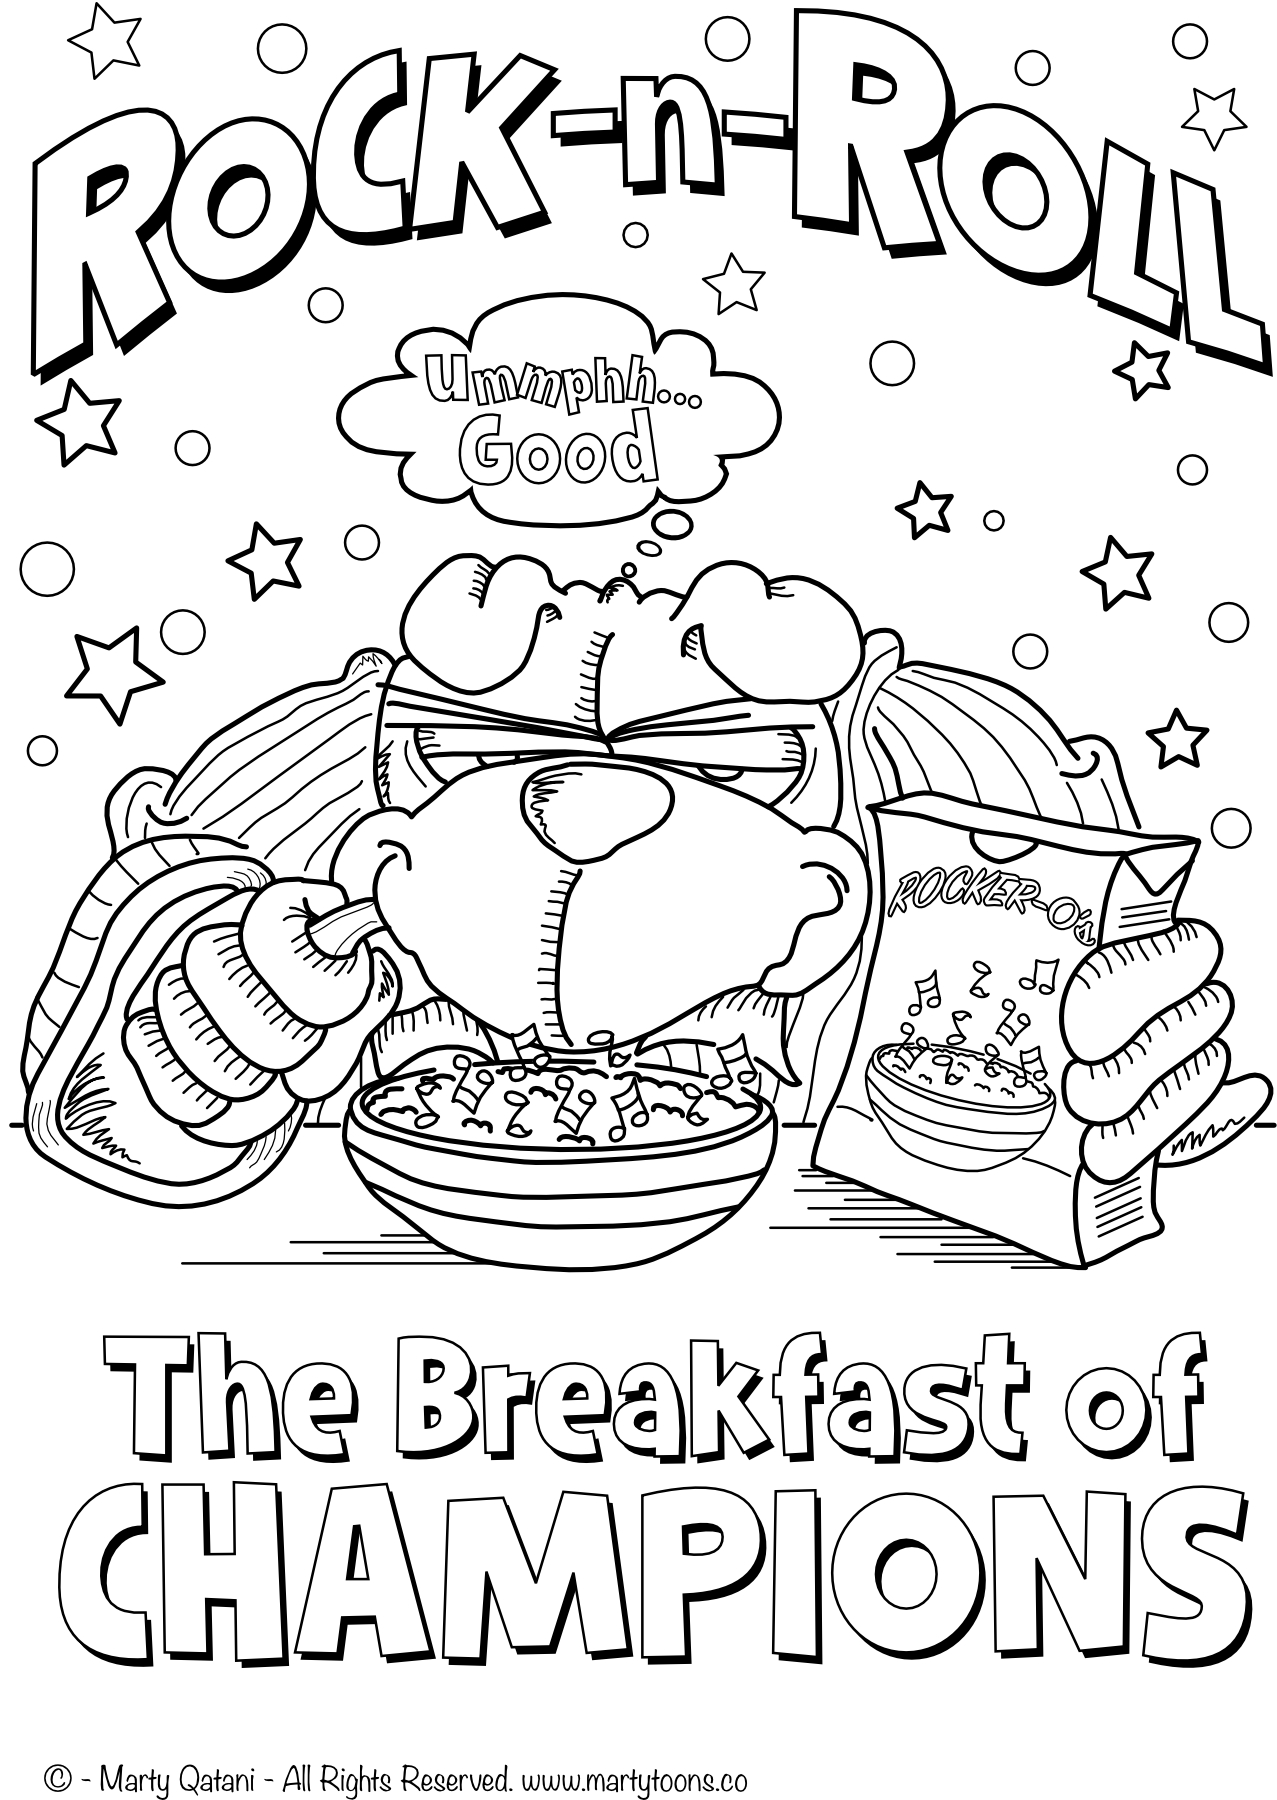 Marty qatani on x rock and roll the breakfast of championsor lunch a page inspired from my rock and roll coloring book httpstcomrjogiwdl inspired by my insatiable hunger for great music rockandroll